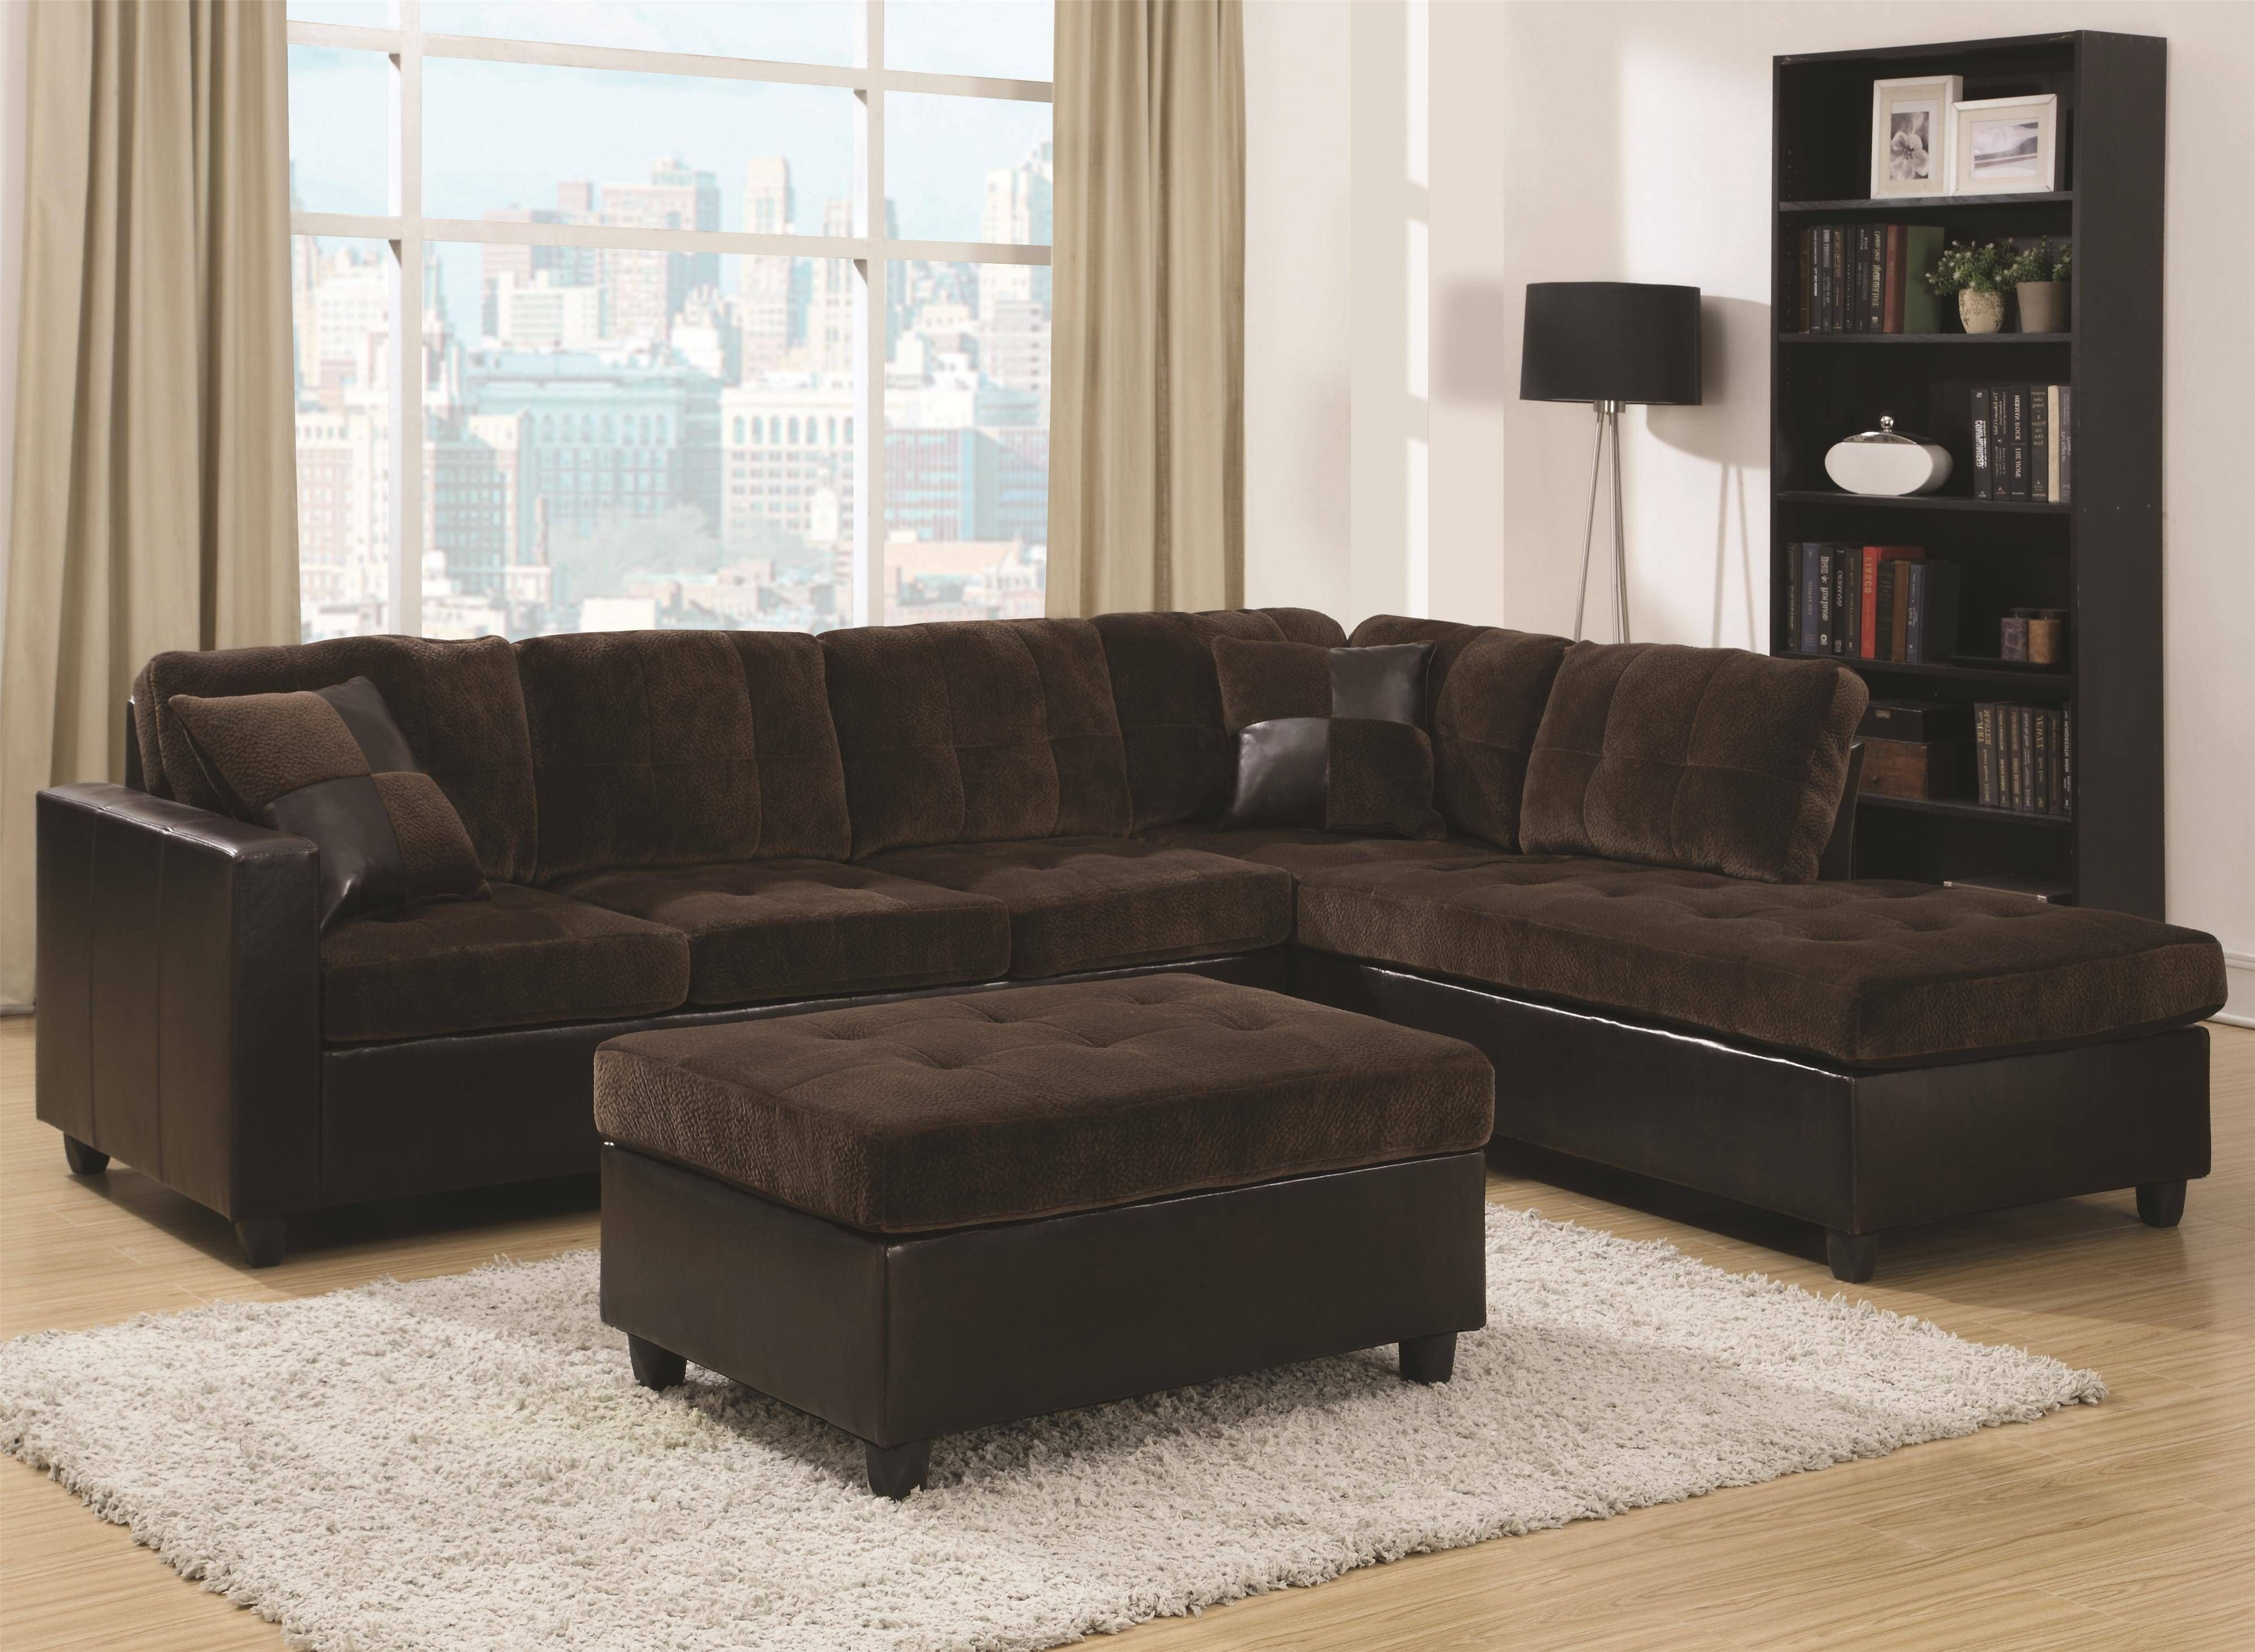 Furniture: Sectional Sofa With Recliner | Sears Sectional Couch In Craftsman Sectional Sofa (View 13 of 30)